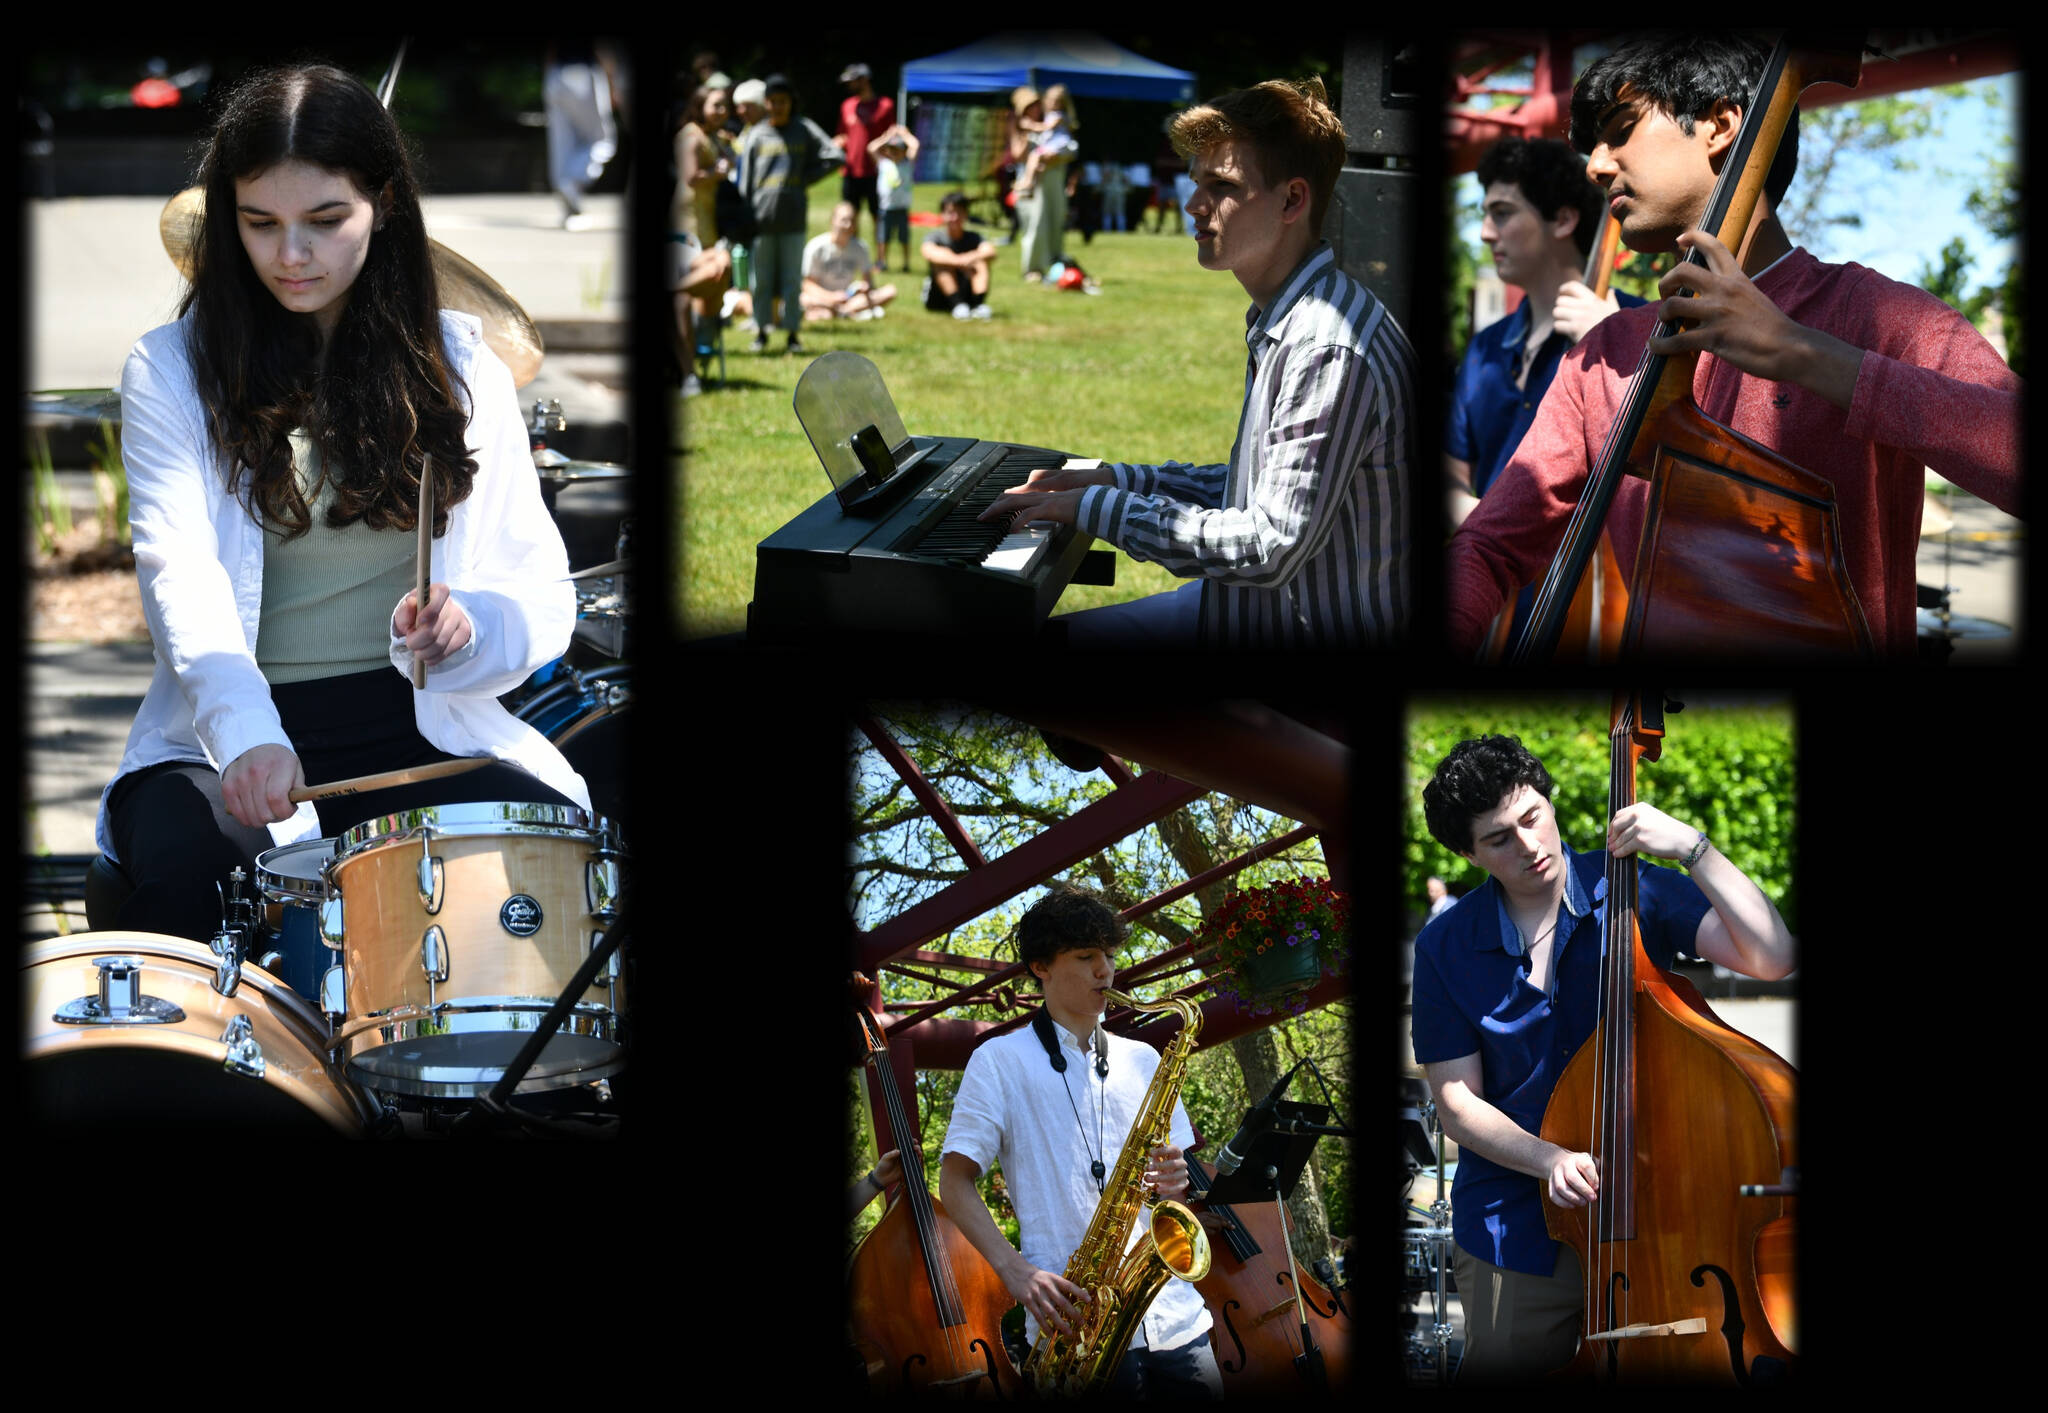 From left to right, top, Mercer Island High School jazz quintet Groove Fusion members are Alanna Larson, drums, Julian Jay, piano, and Sidh Shroff, bass; and bottom, Lukas Flood Wallin, saxophone, and Daniel Marcus, bass. The band performed at the June 19 Juneteenth Community Celebration at Mercerdale Park. Andy Nystrom/ staff photos